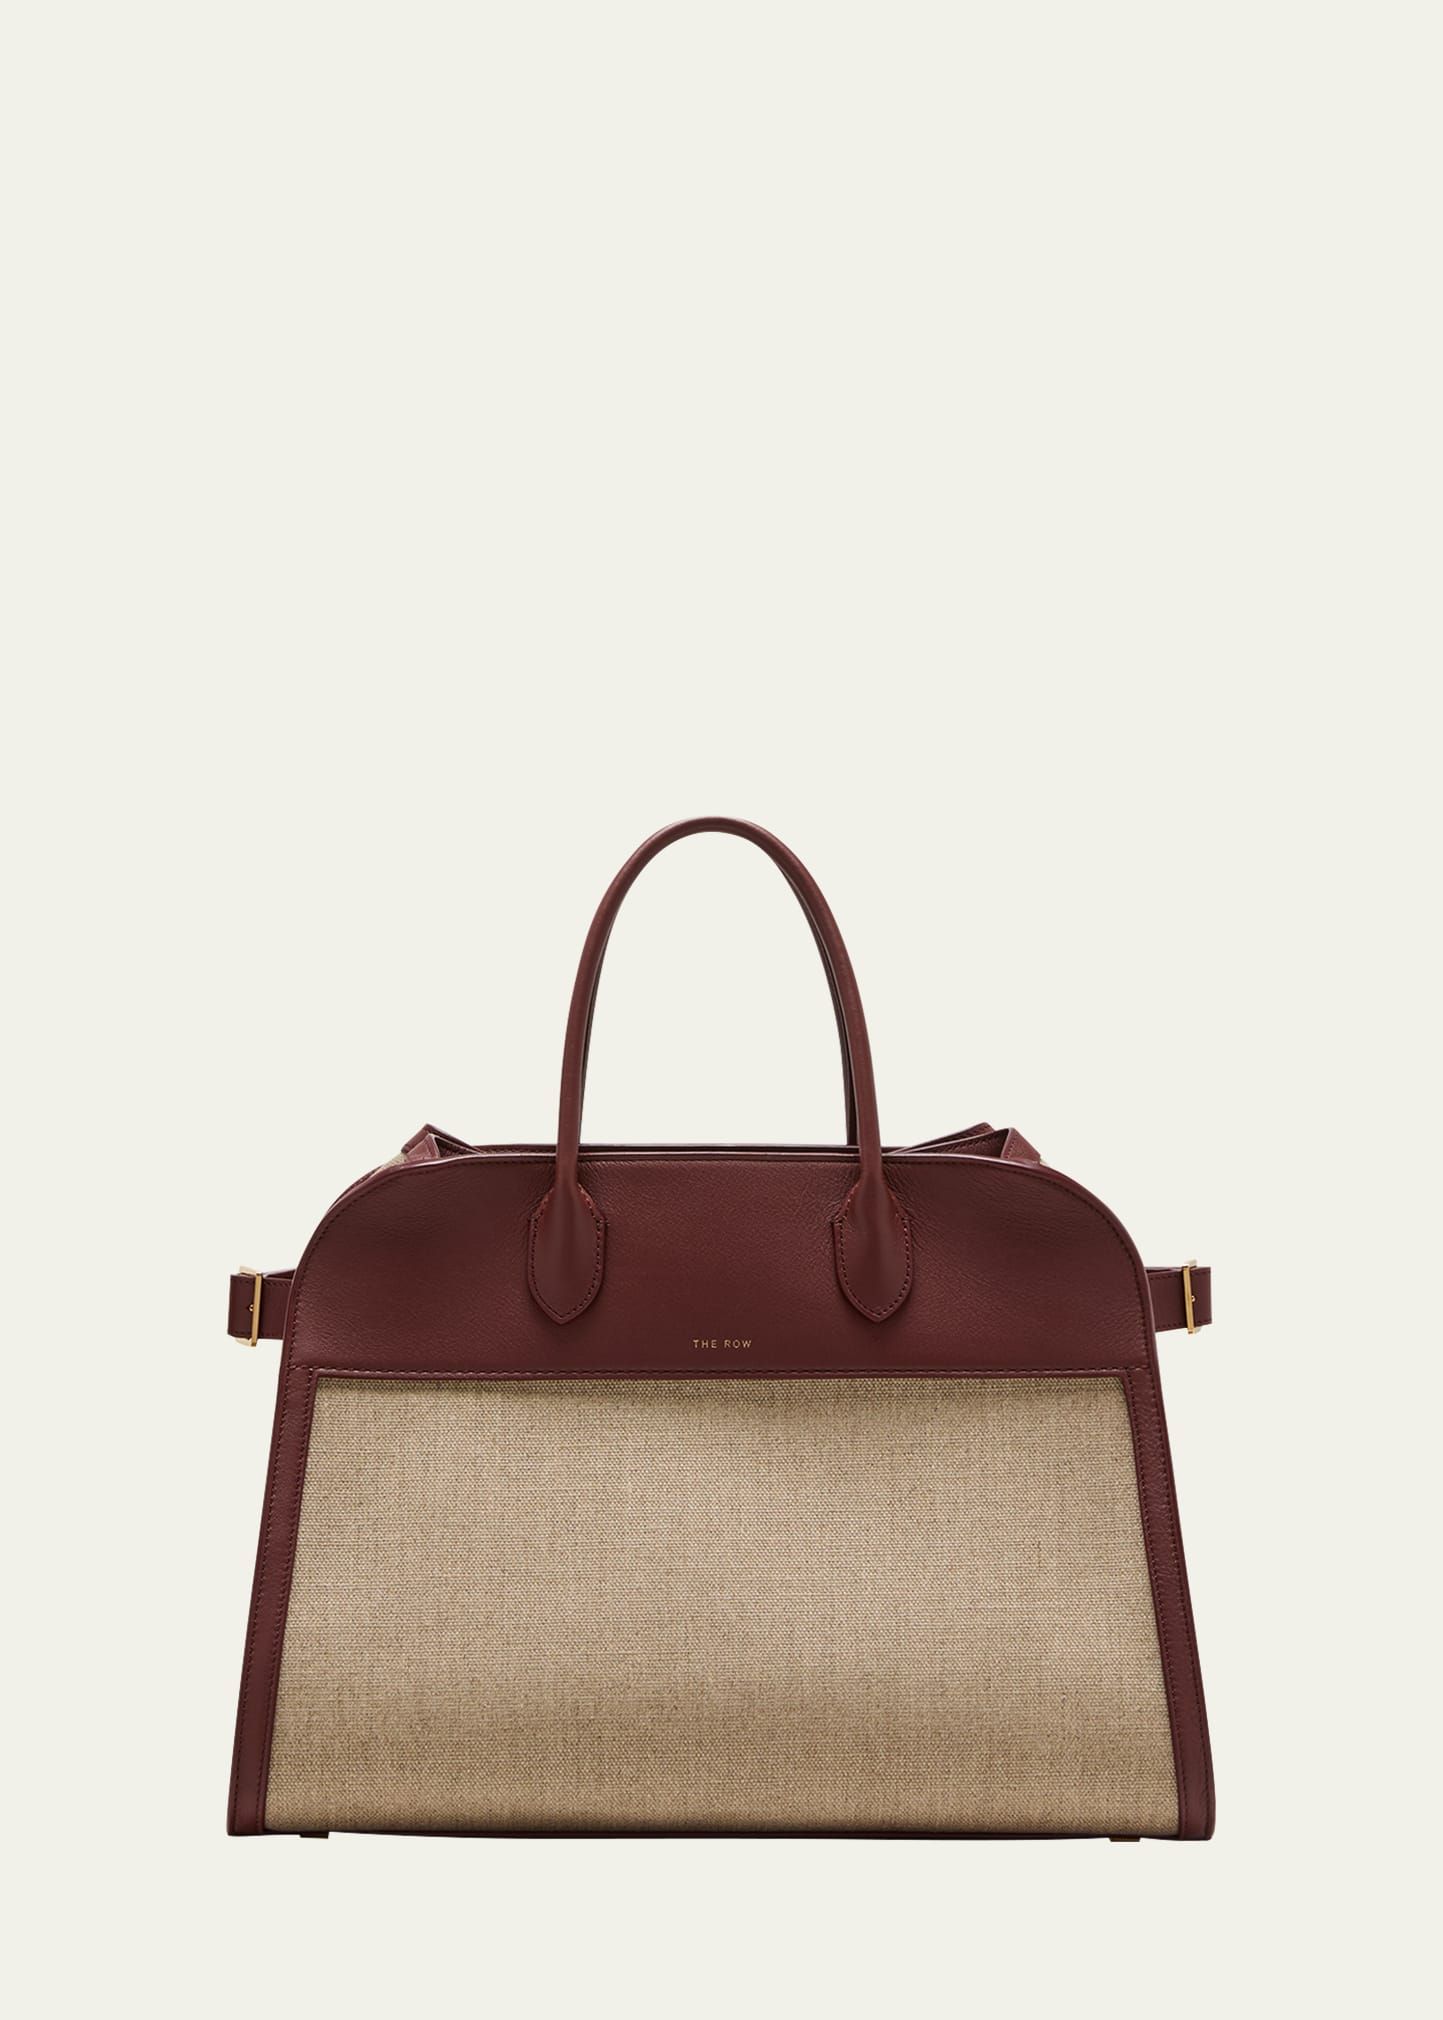 THE ROW Margaux 15 Top-Handle Bag in Canvas and Leather | Bergdorf Goodman